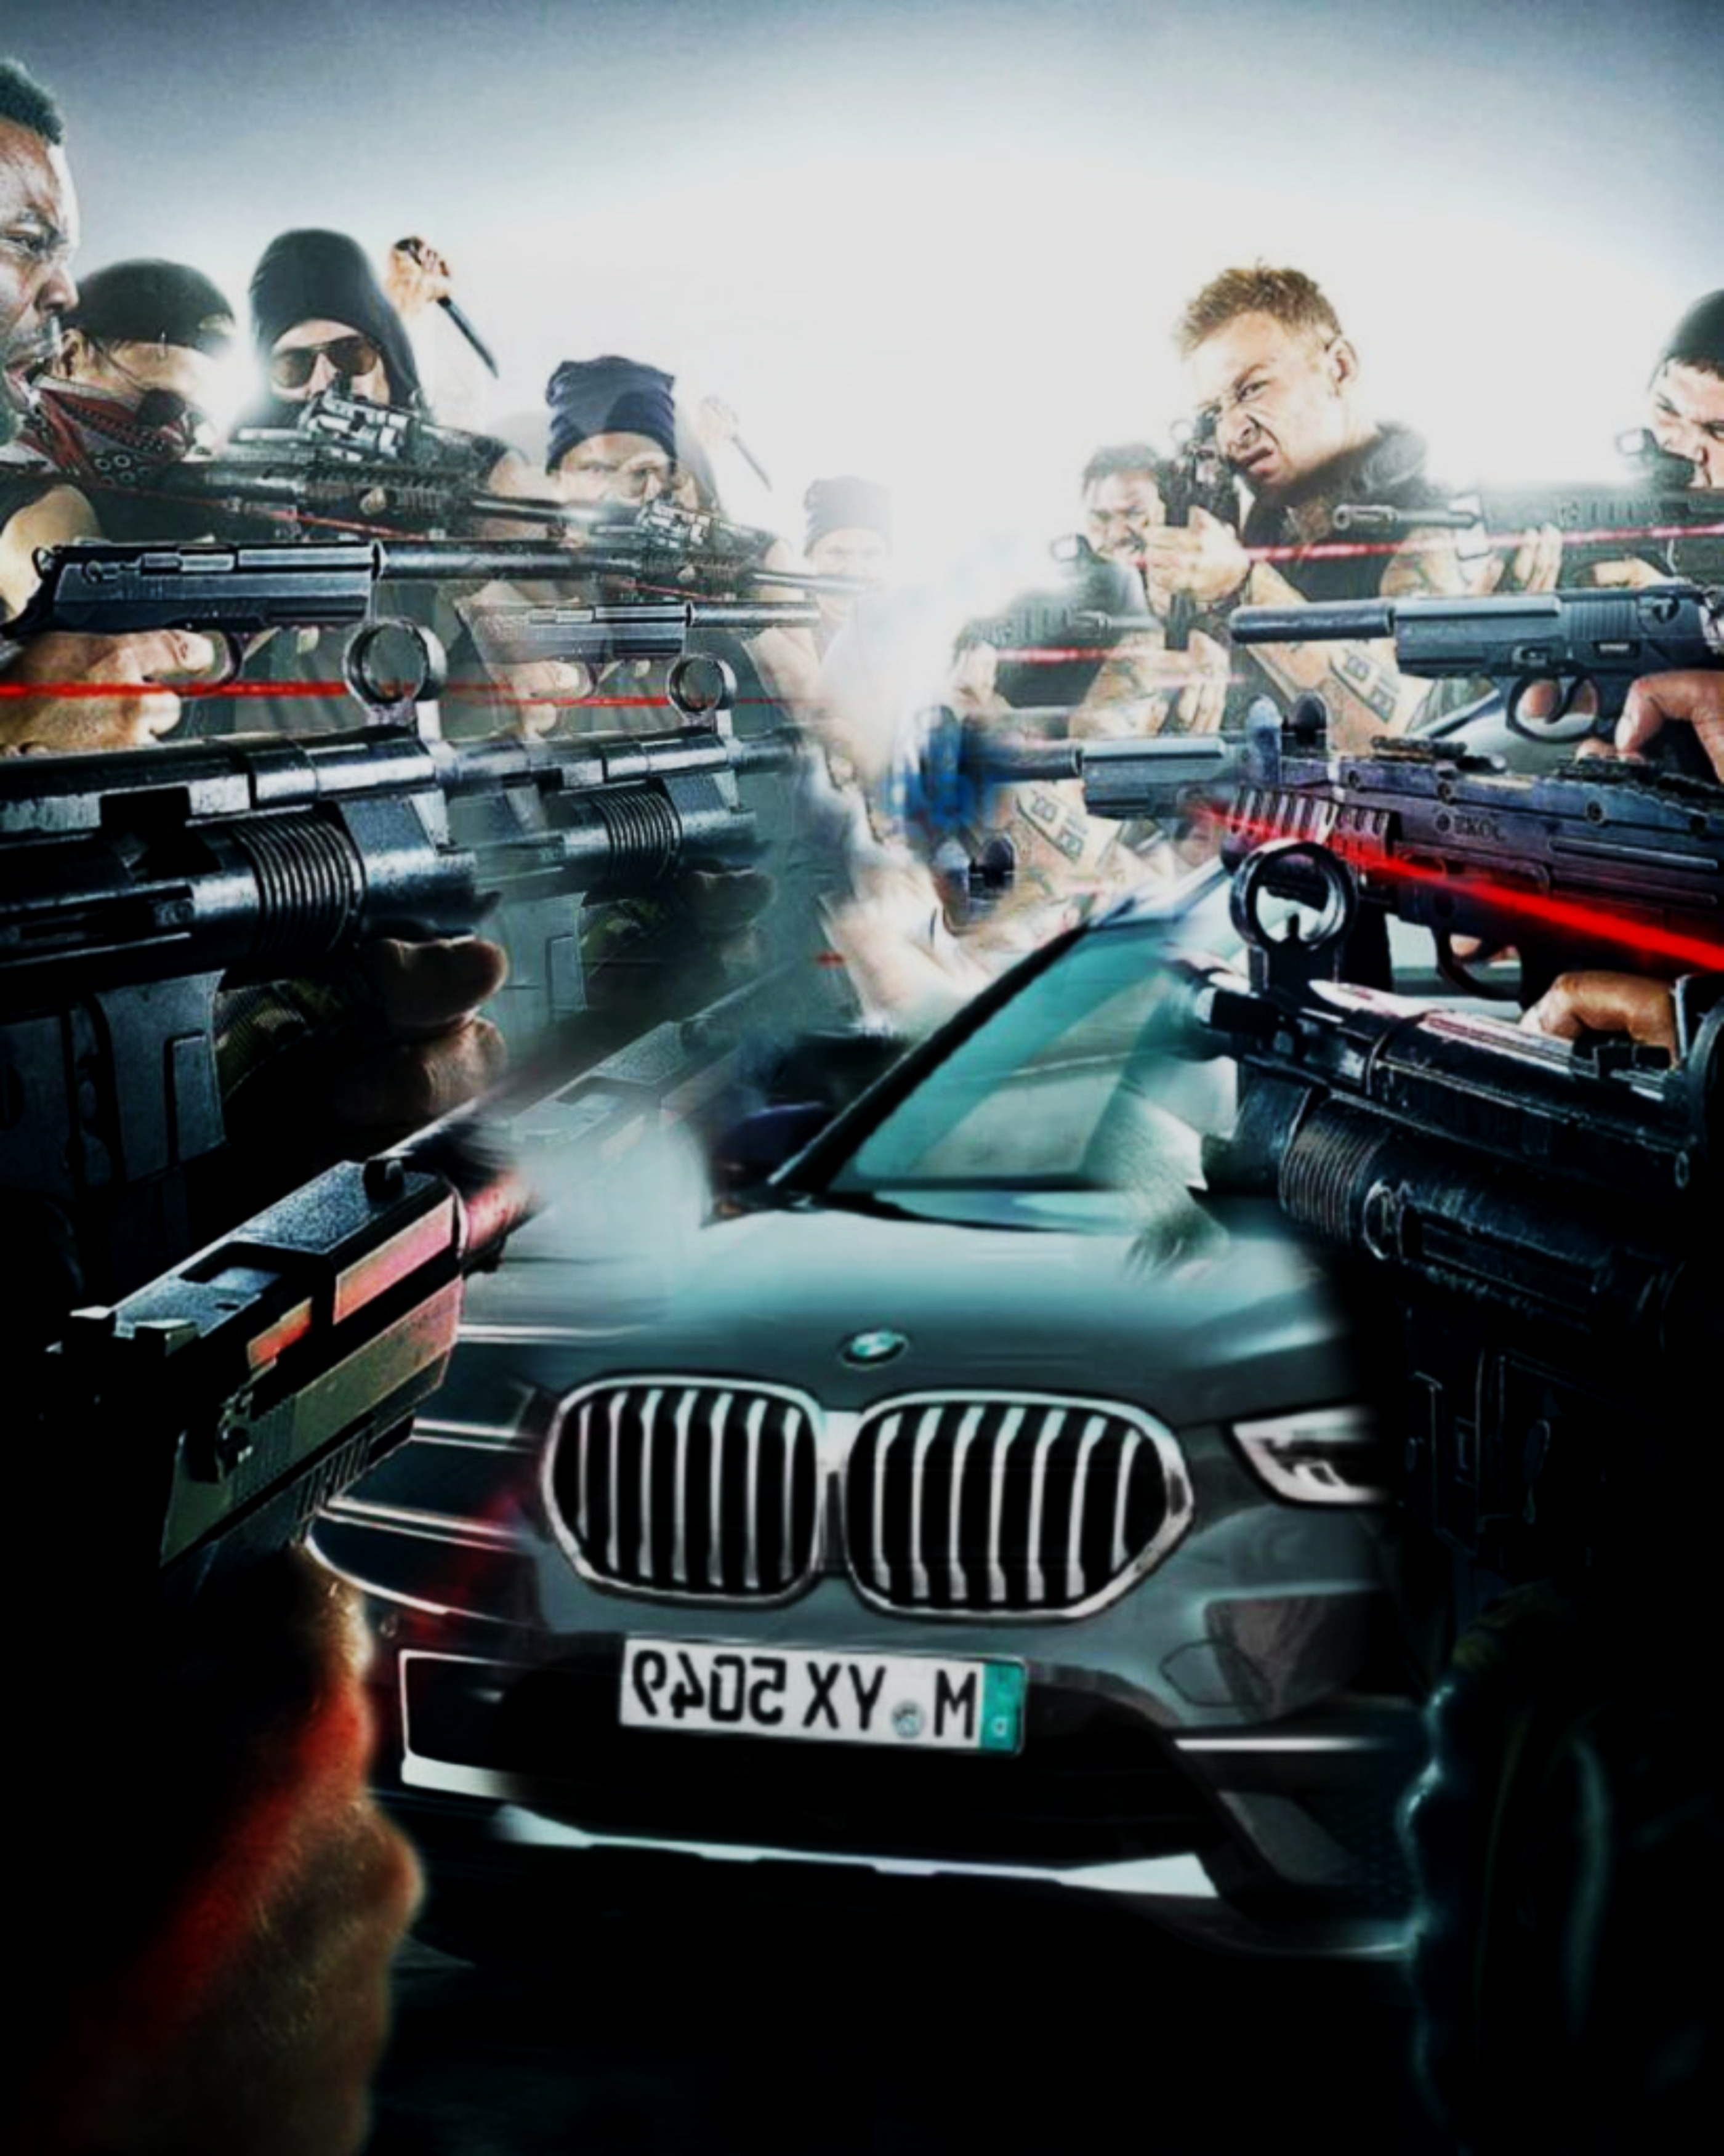 You are currently viewing Car and gun image editing background download for free